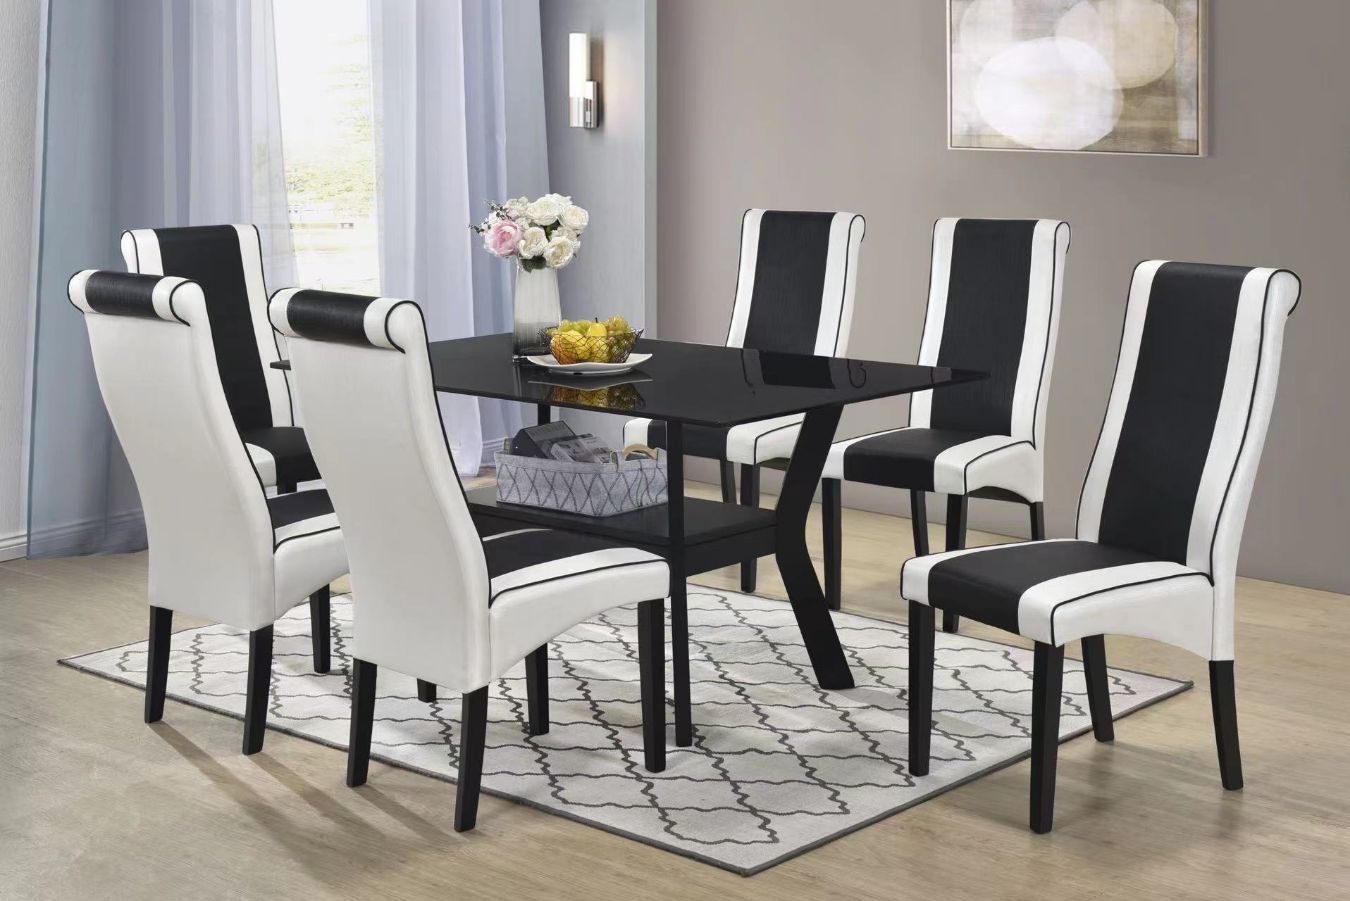 The Perfect Dining Experience: Introducing the Sarah Dining Table